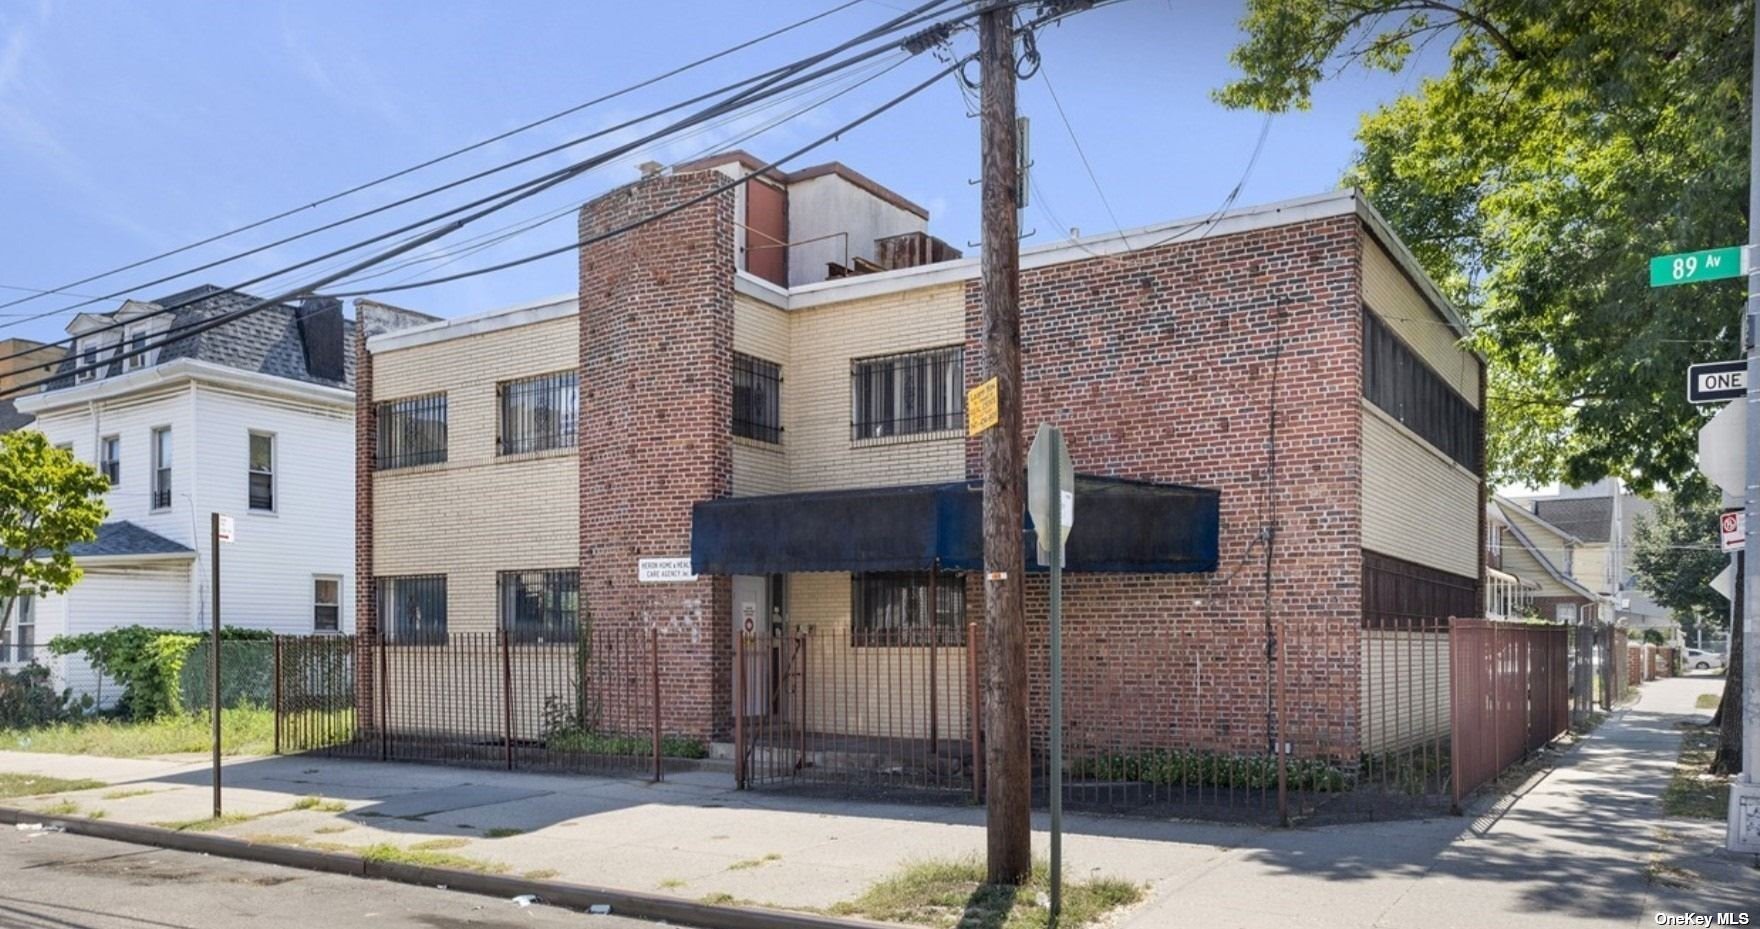 Commercial Sale in Jamaica - 89th  Queens, NY 11432